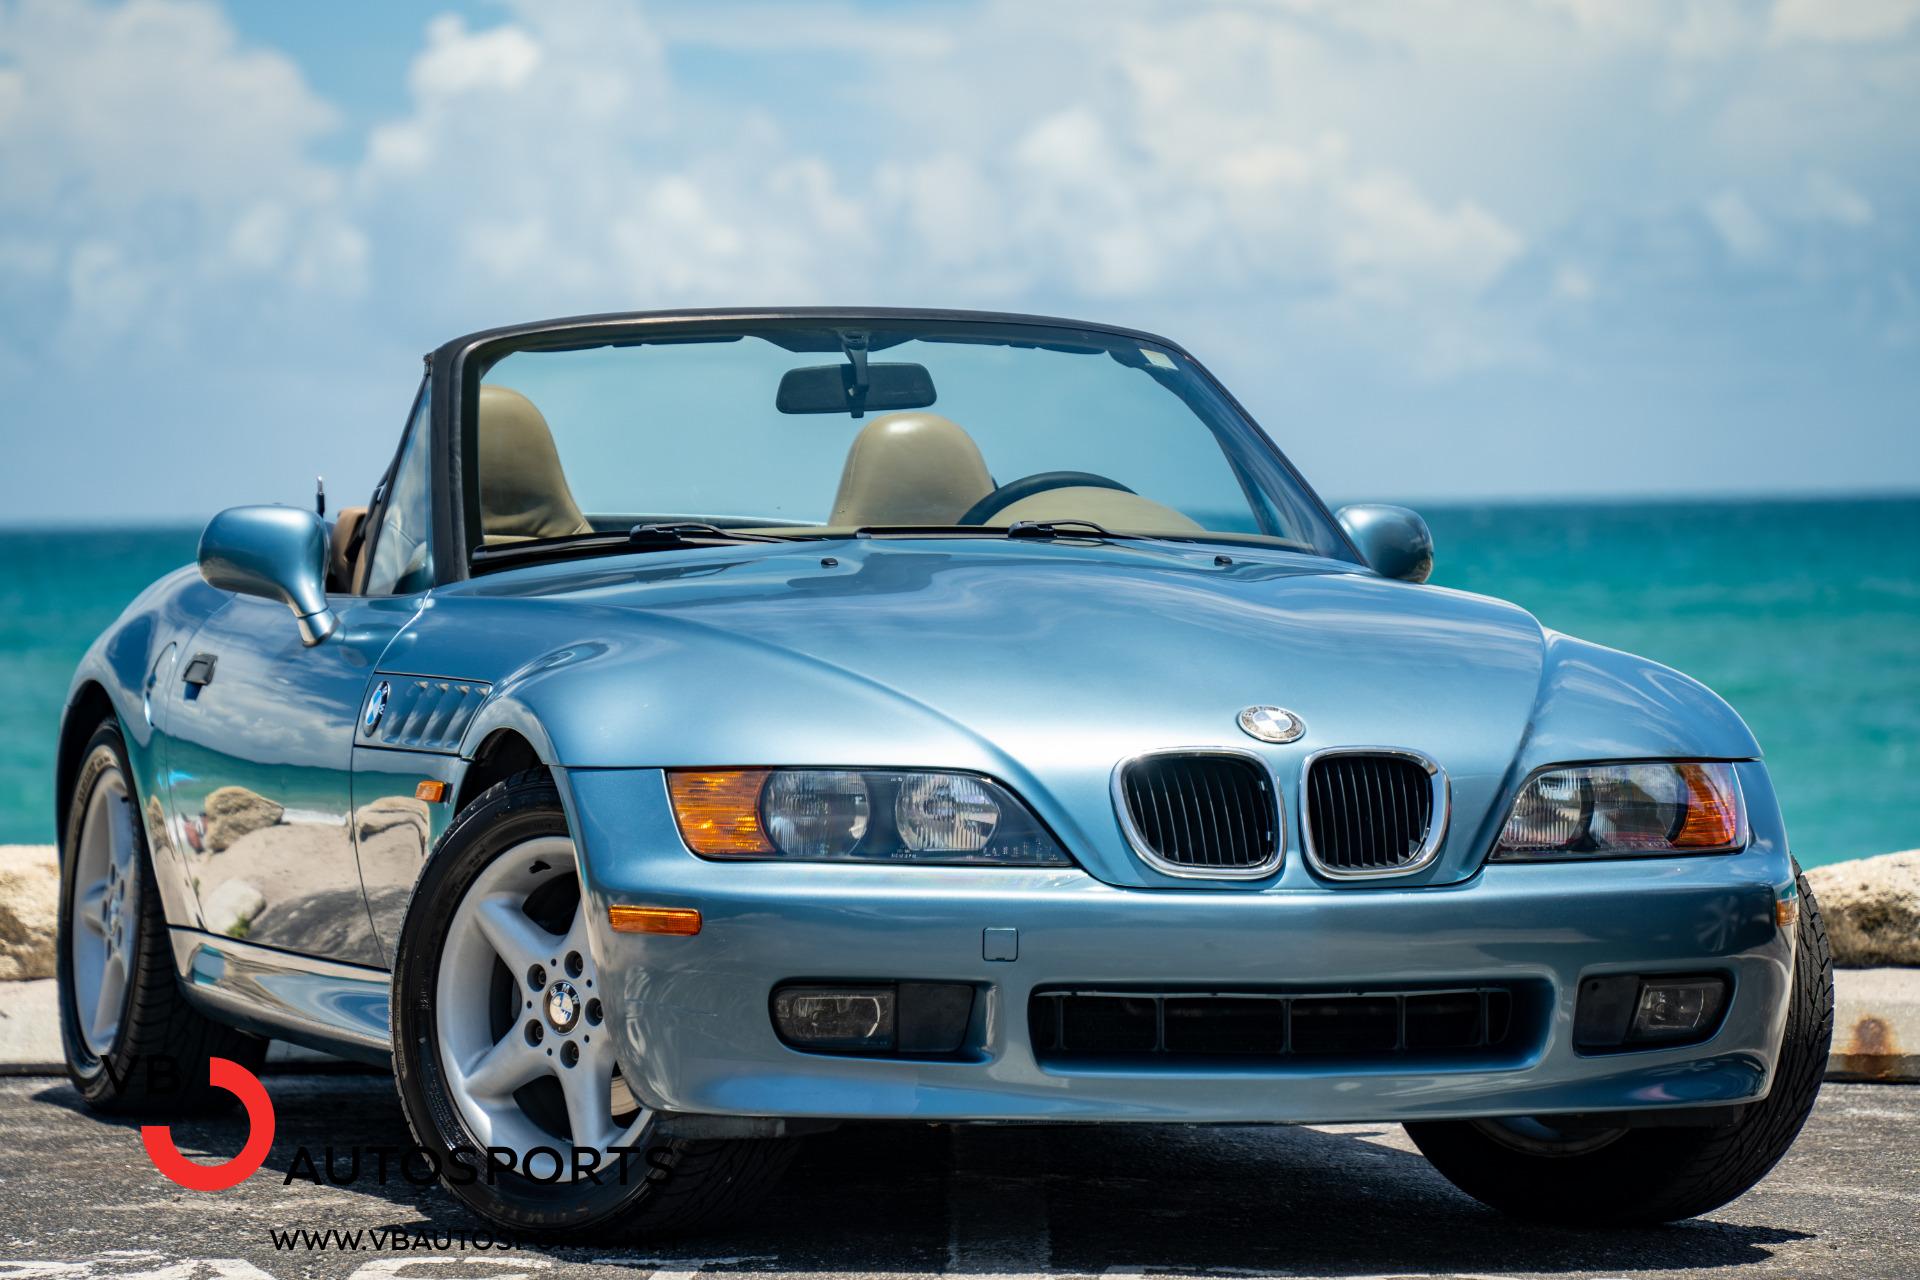 1997 BMW Z3 Roadster- Atlantic Blue over Sand Leather, 5-speed manual, 100%  original, 49k miles and literally as new! I LOVE the Z3 and this is as good  as it gets!-$9,995 